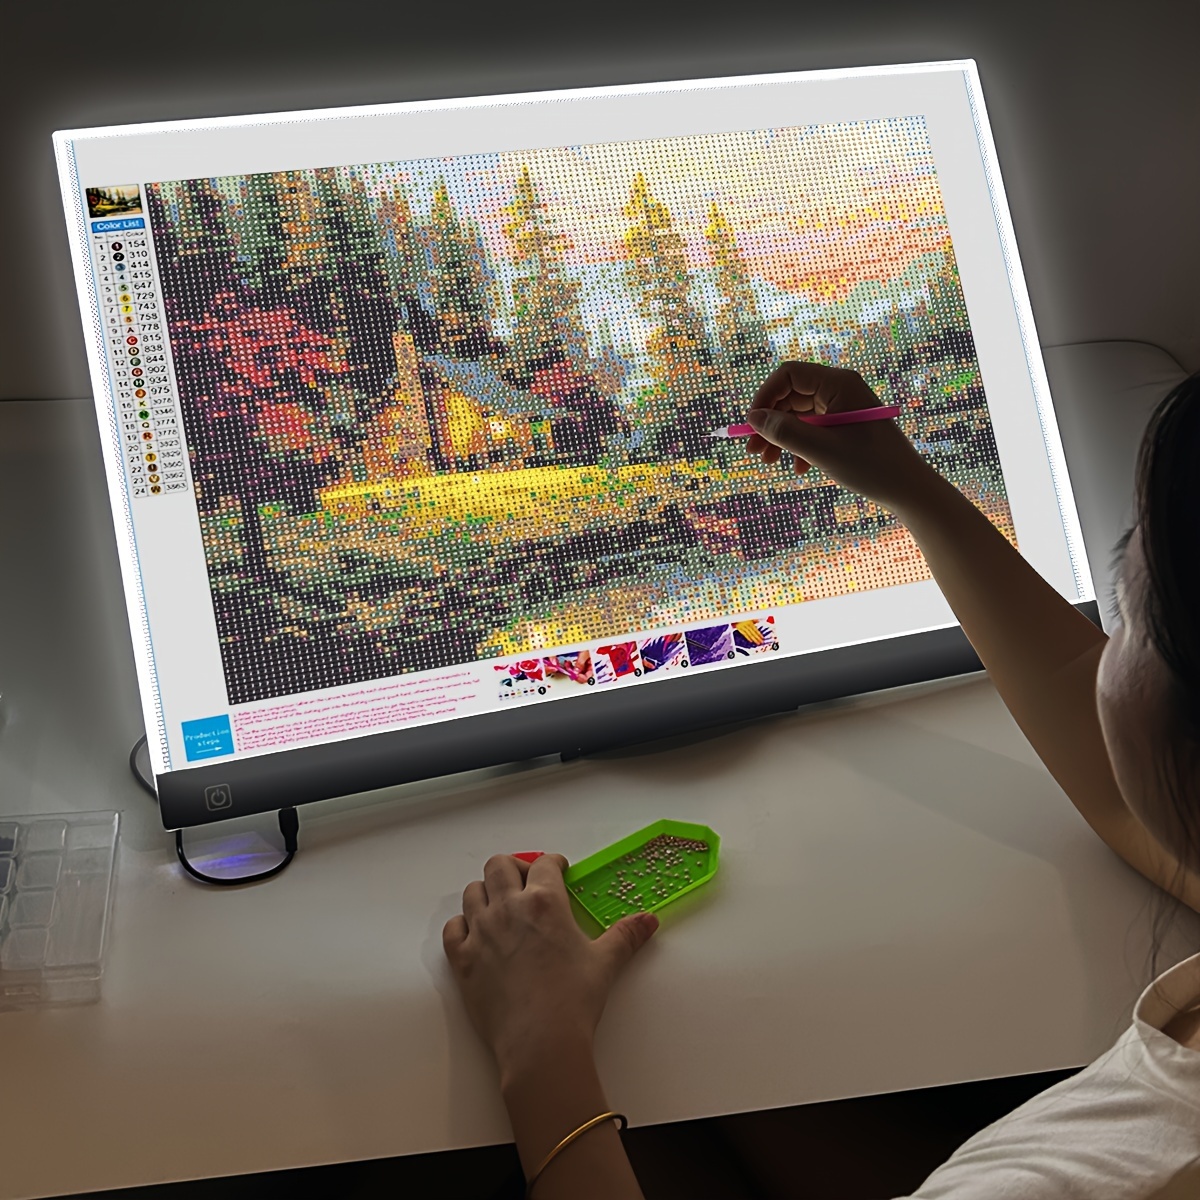 

Large Size Led Light Pad, Usb Interface, Adjustable 3 Brightness Diamond Art Light Board, Suitable For Sketching, Animation, Drawing, And Diamond Painting, Easy To View And Precise Spray Painting